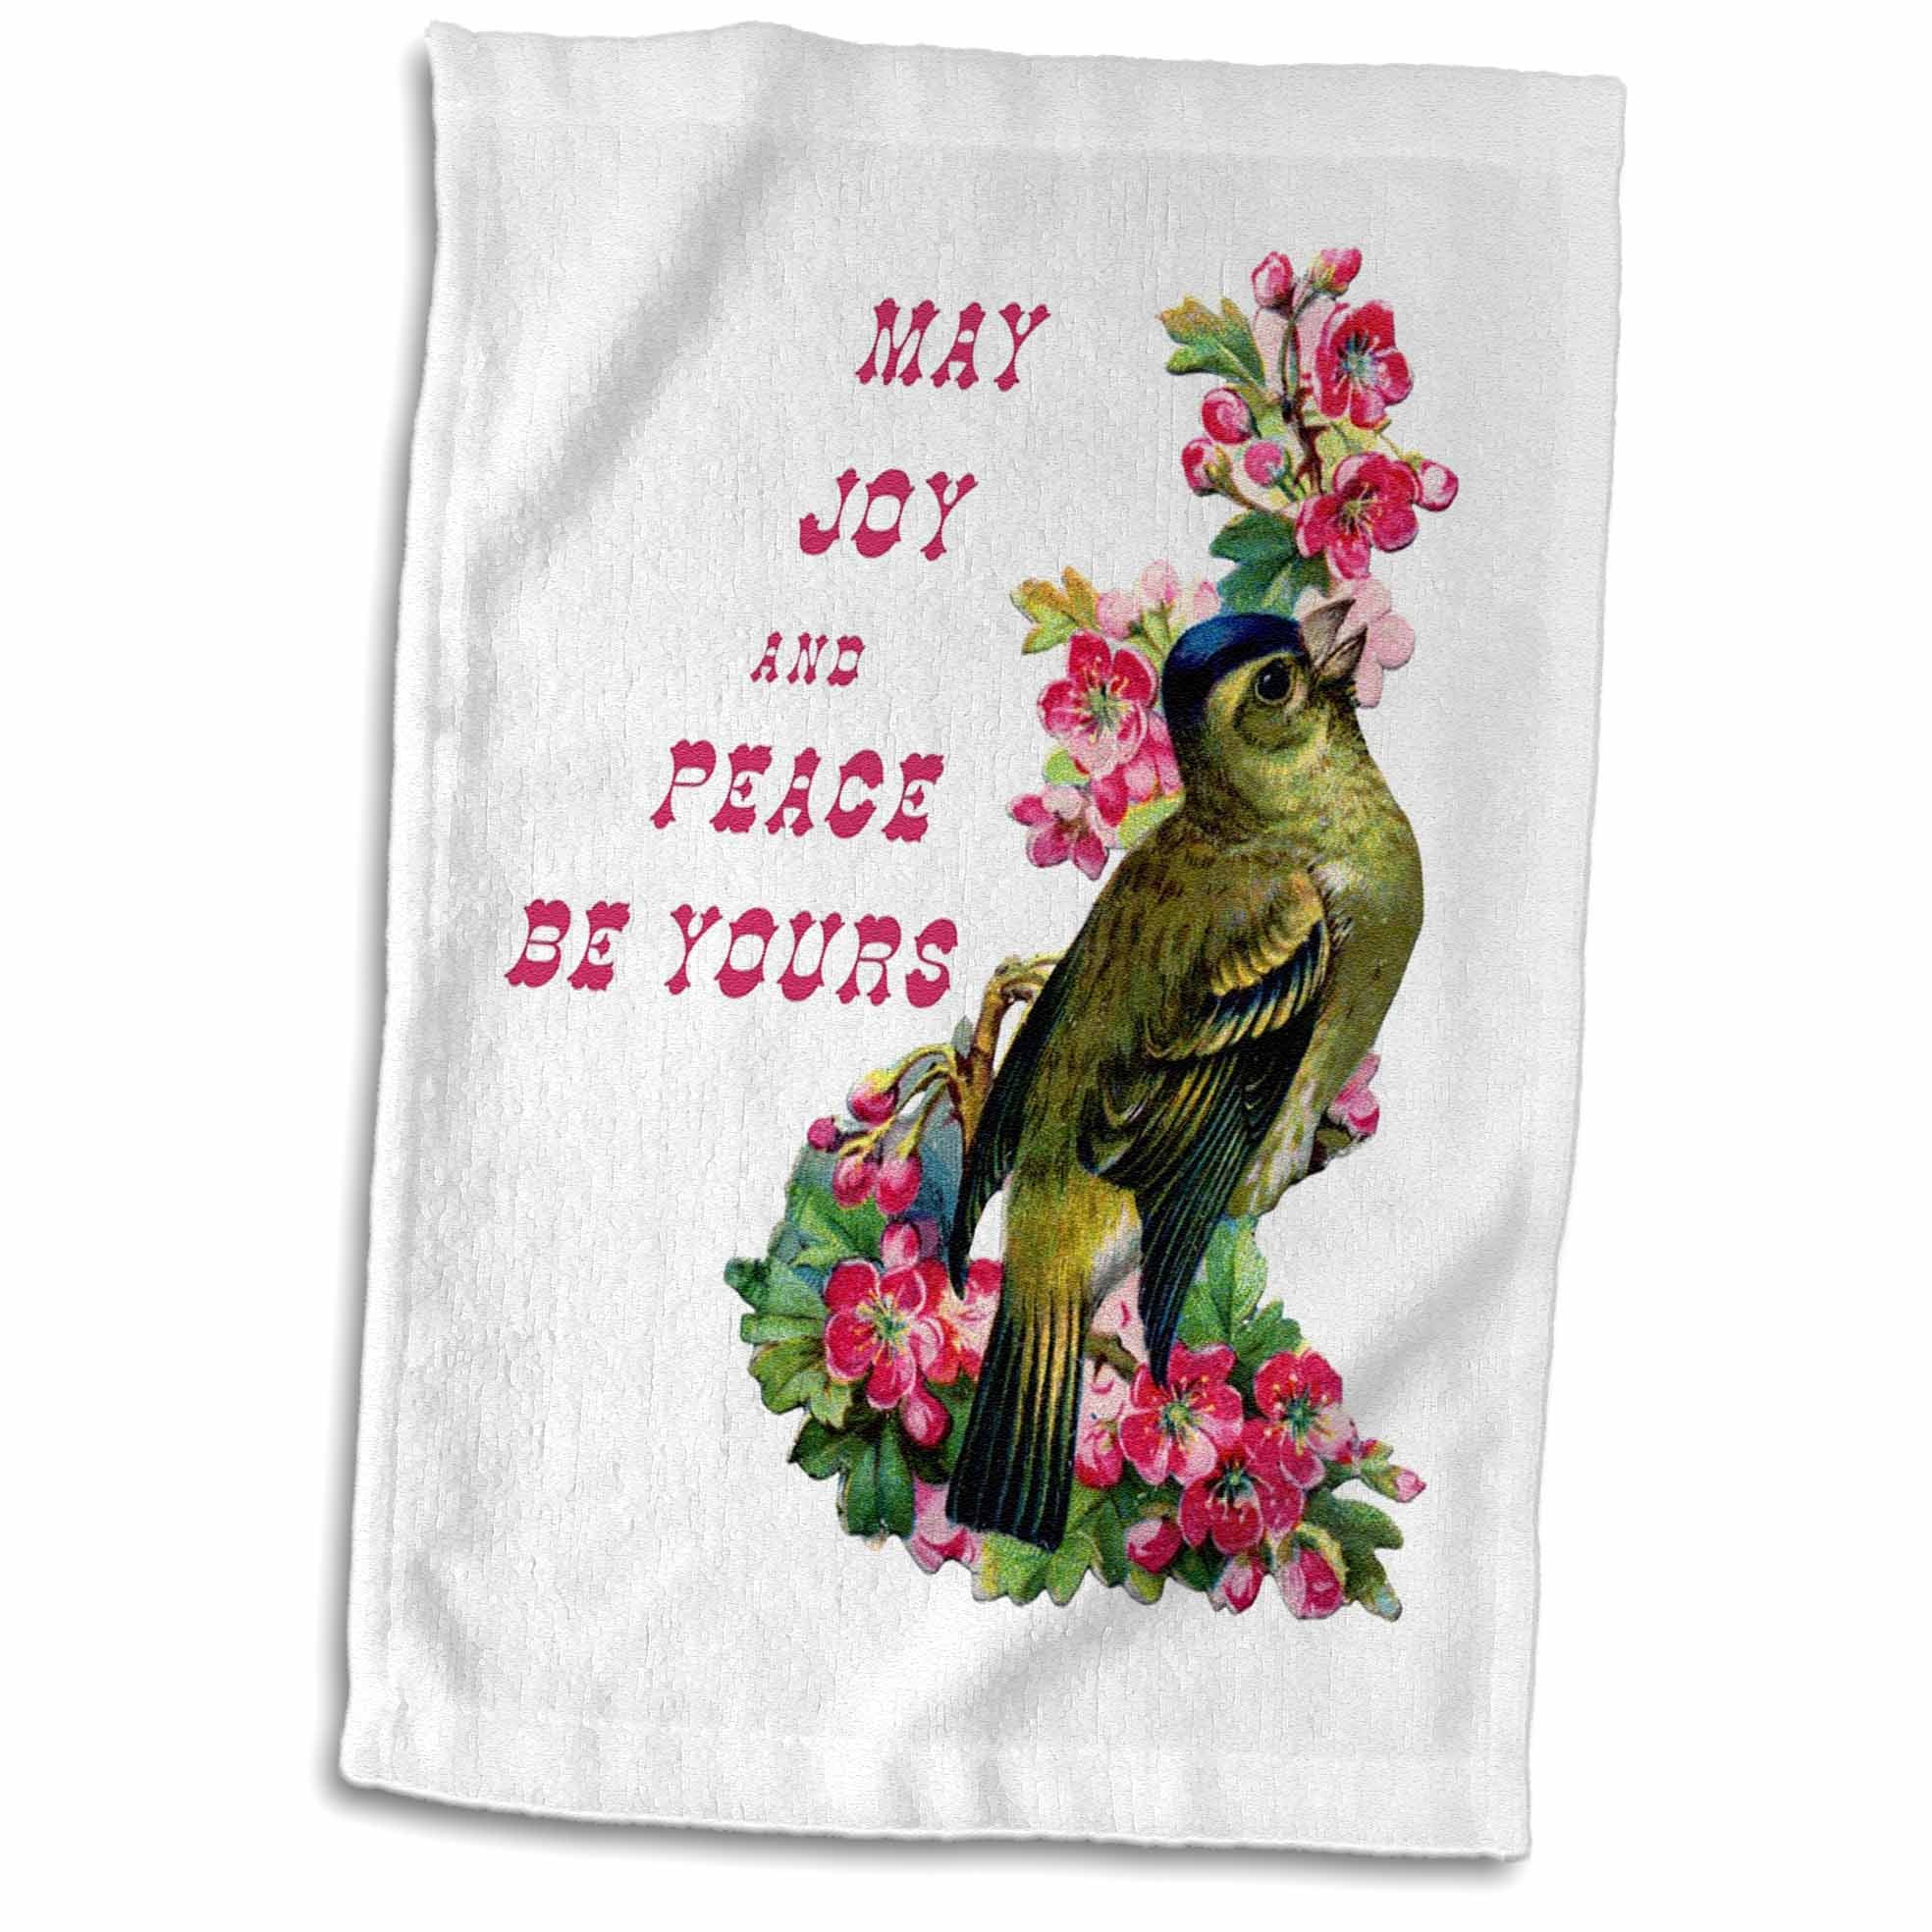 3D Rose Flying Doves with Words Peace and Love in Blue and White Hand Towel 15 x 22 Multicolor